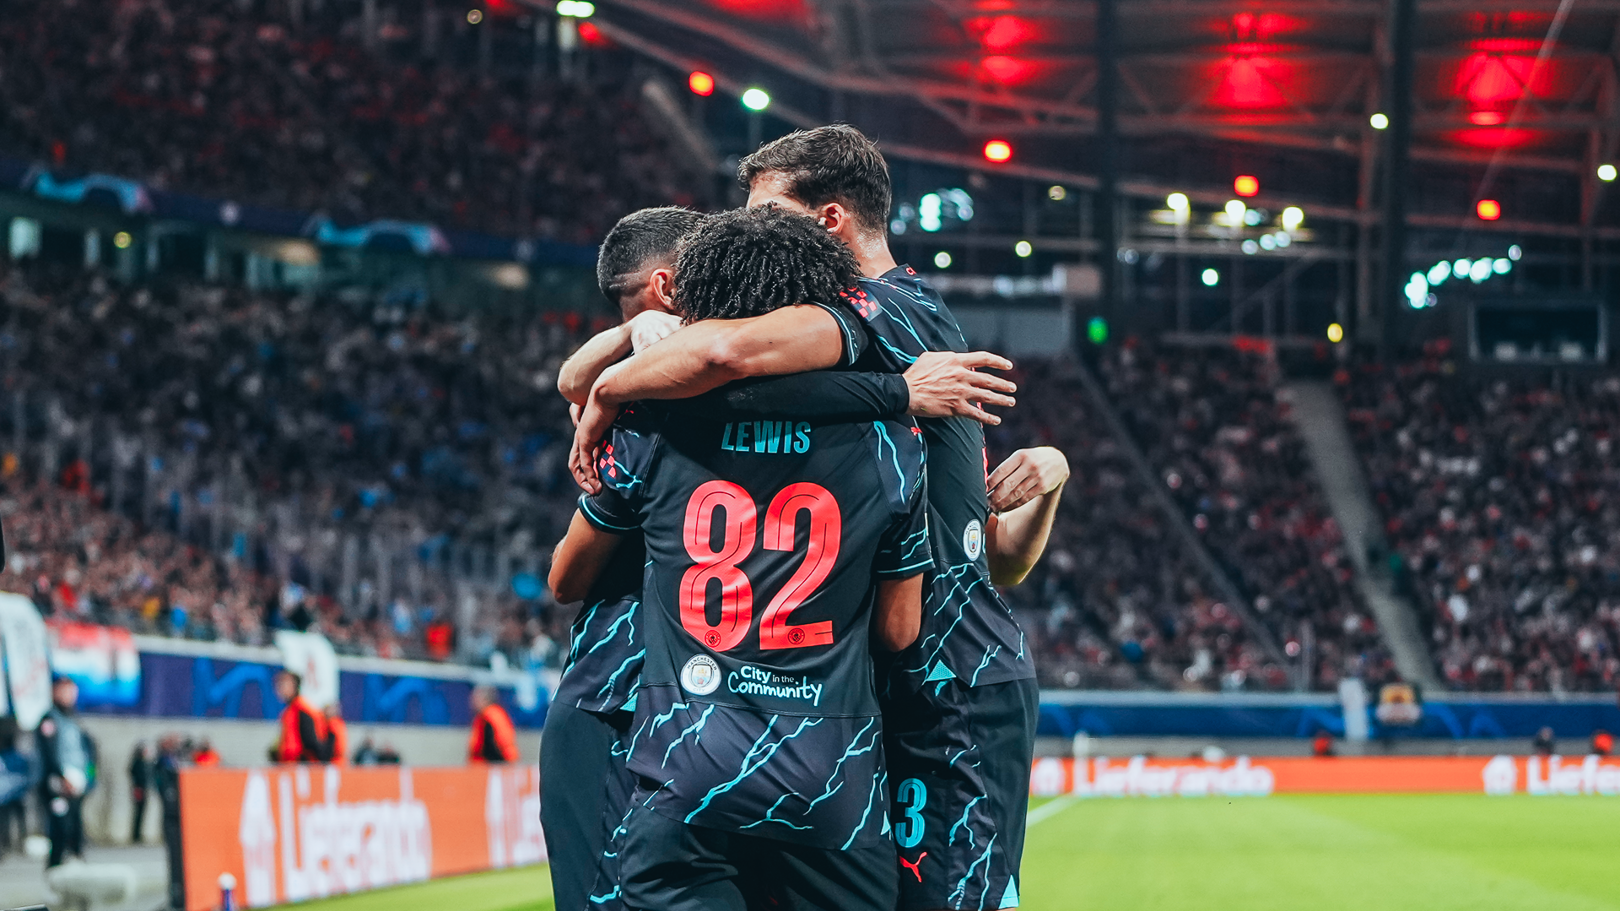 Unbeaten runs and Lewis impact: RB Leipzig stats of the match